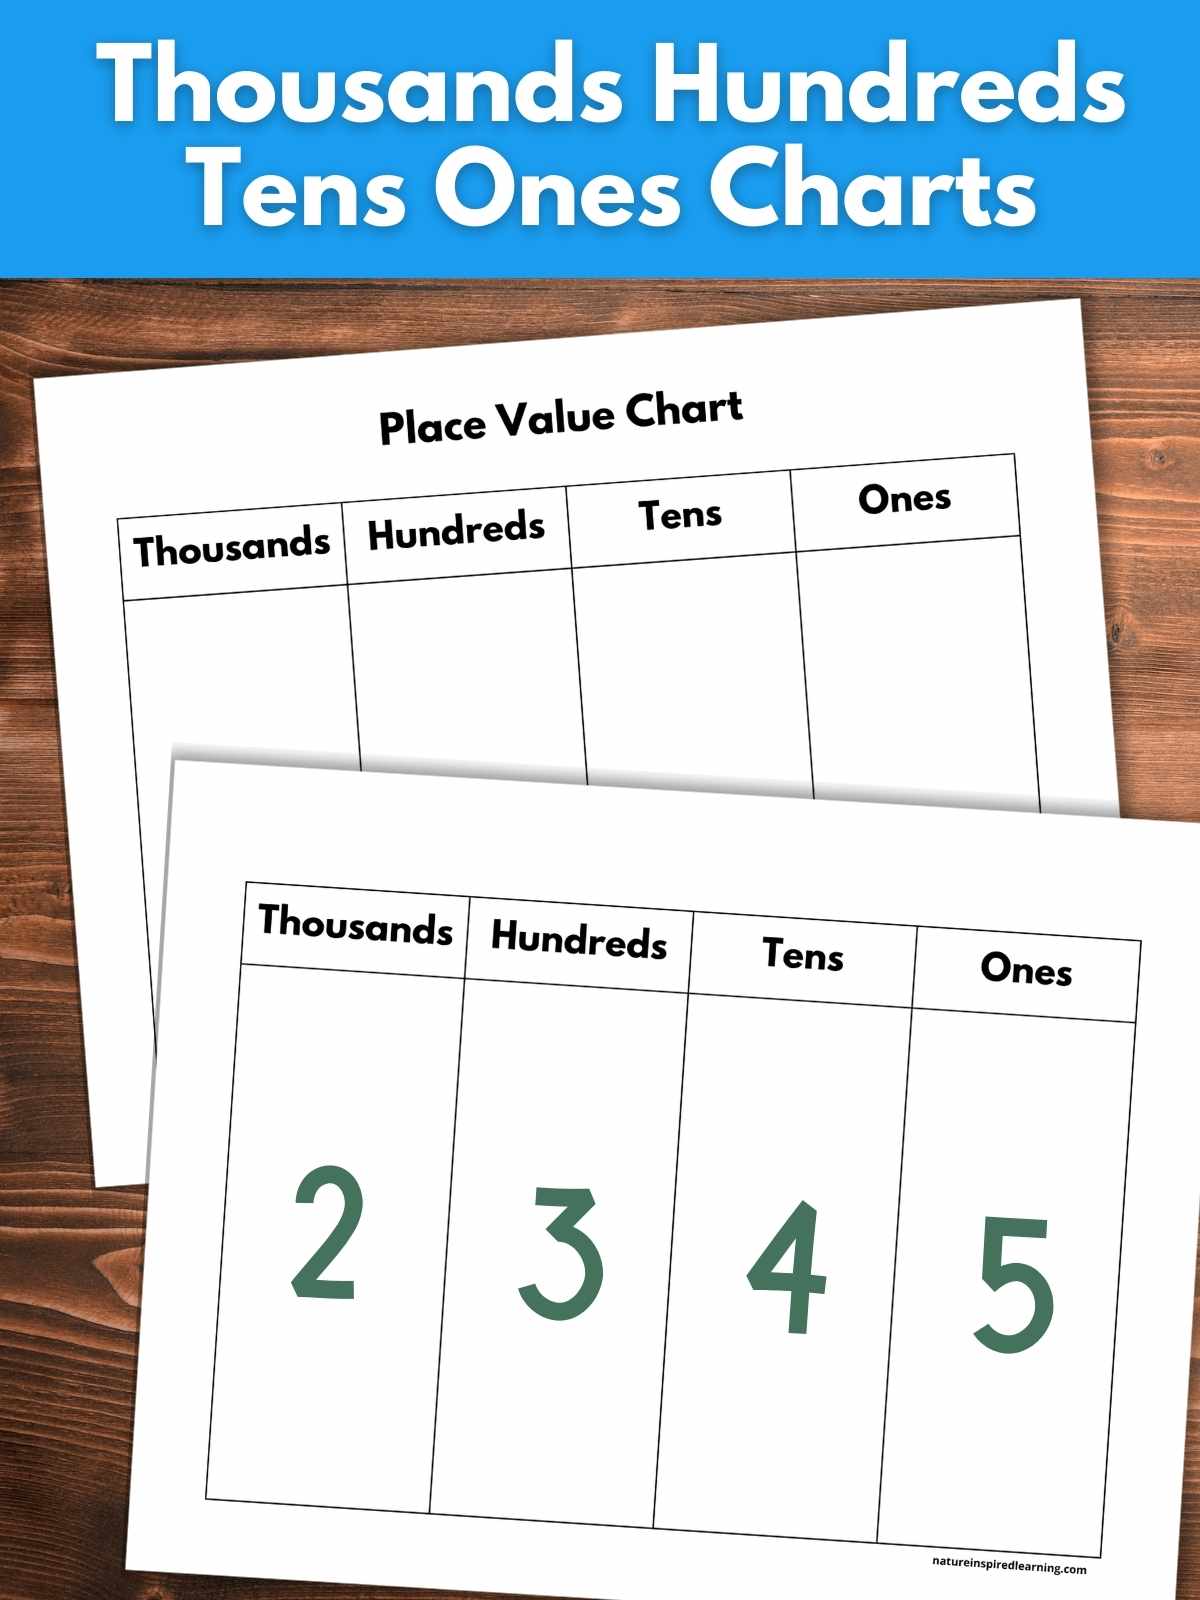 Two math charts with thousands hundreds tens and ones charts overlapping each other on a wooden background. Dark green numbers on the front printable. Text overlay across a blue background across the top.